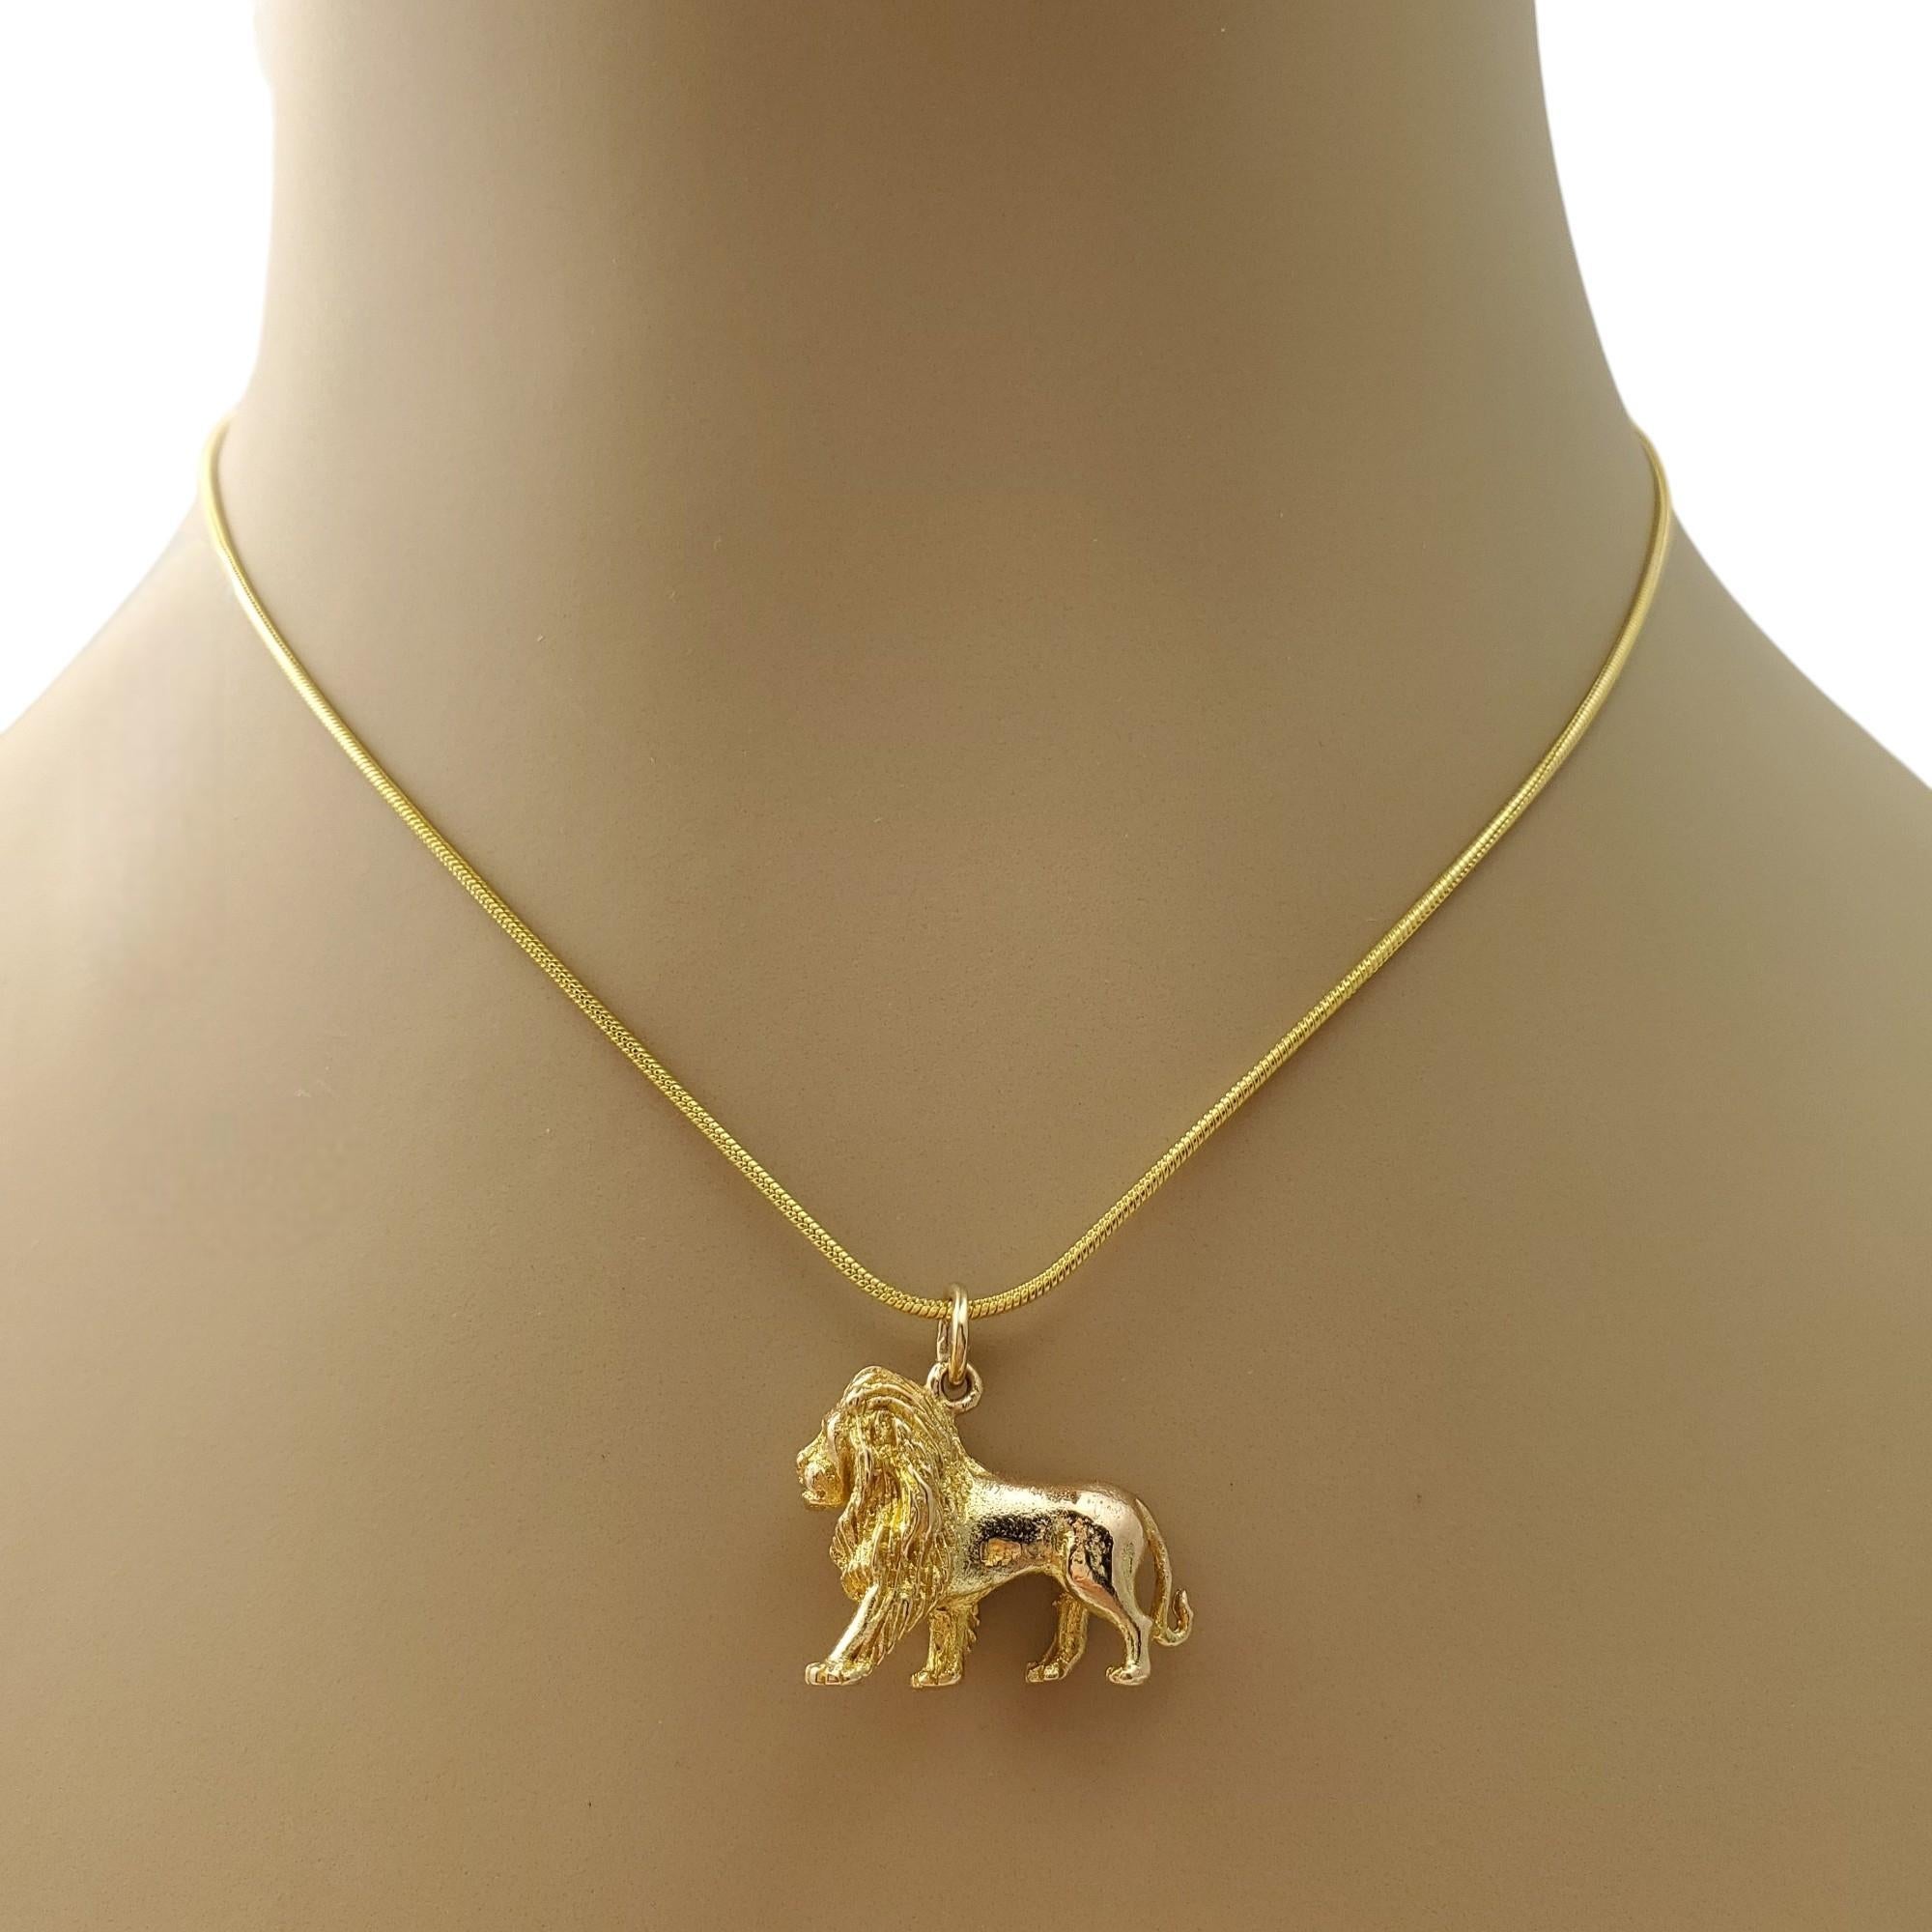 9K Solid Yellow Gold Lion Charm #16586 For Sale 5